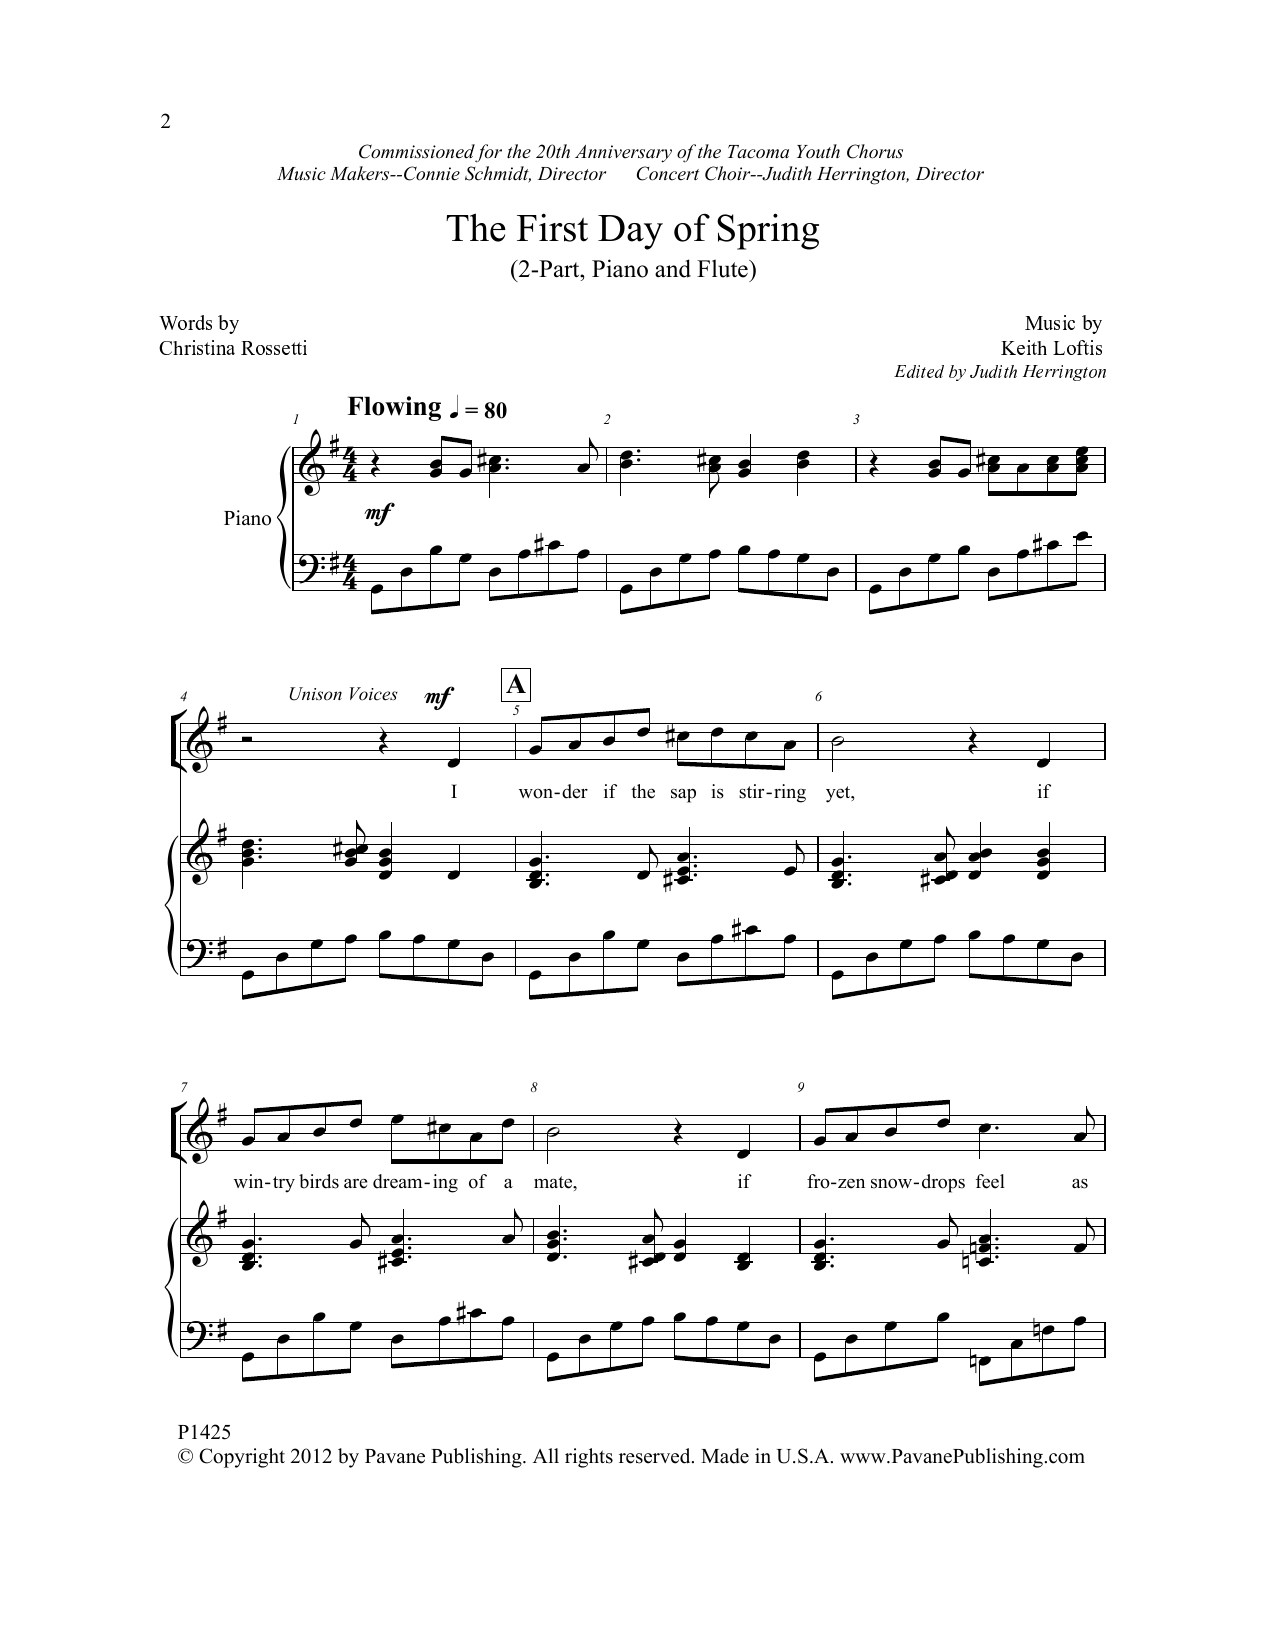 The First Day of Spring sheet music